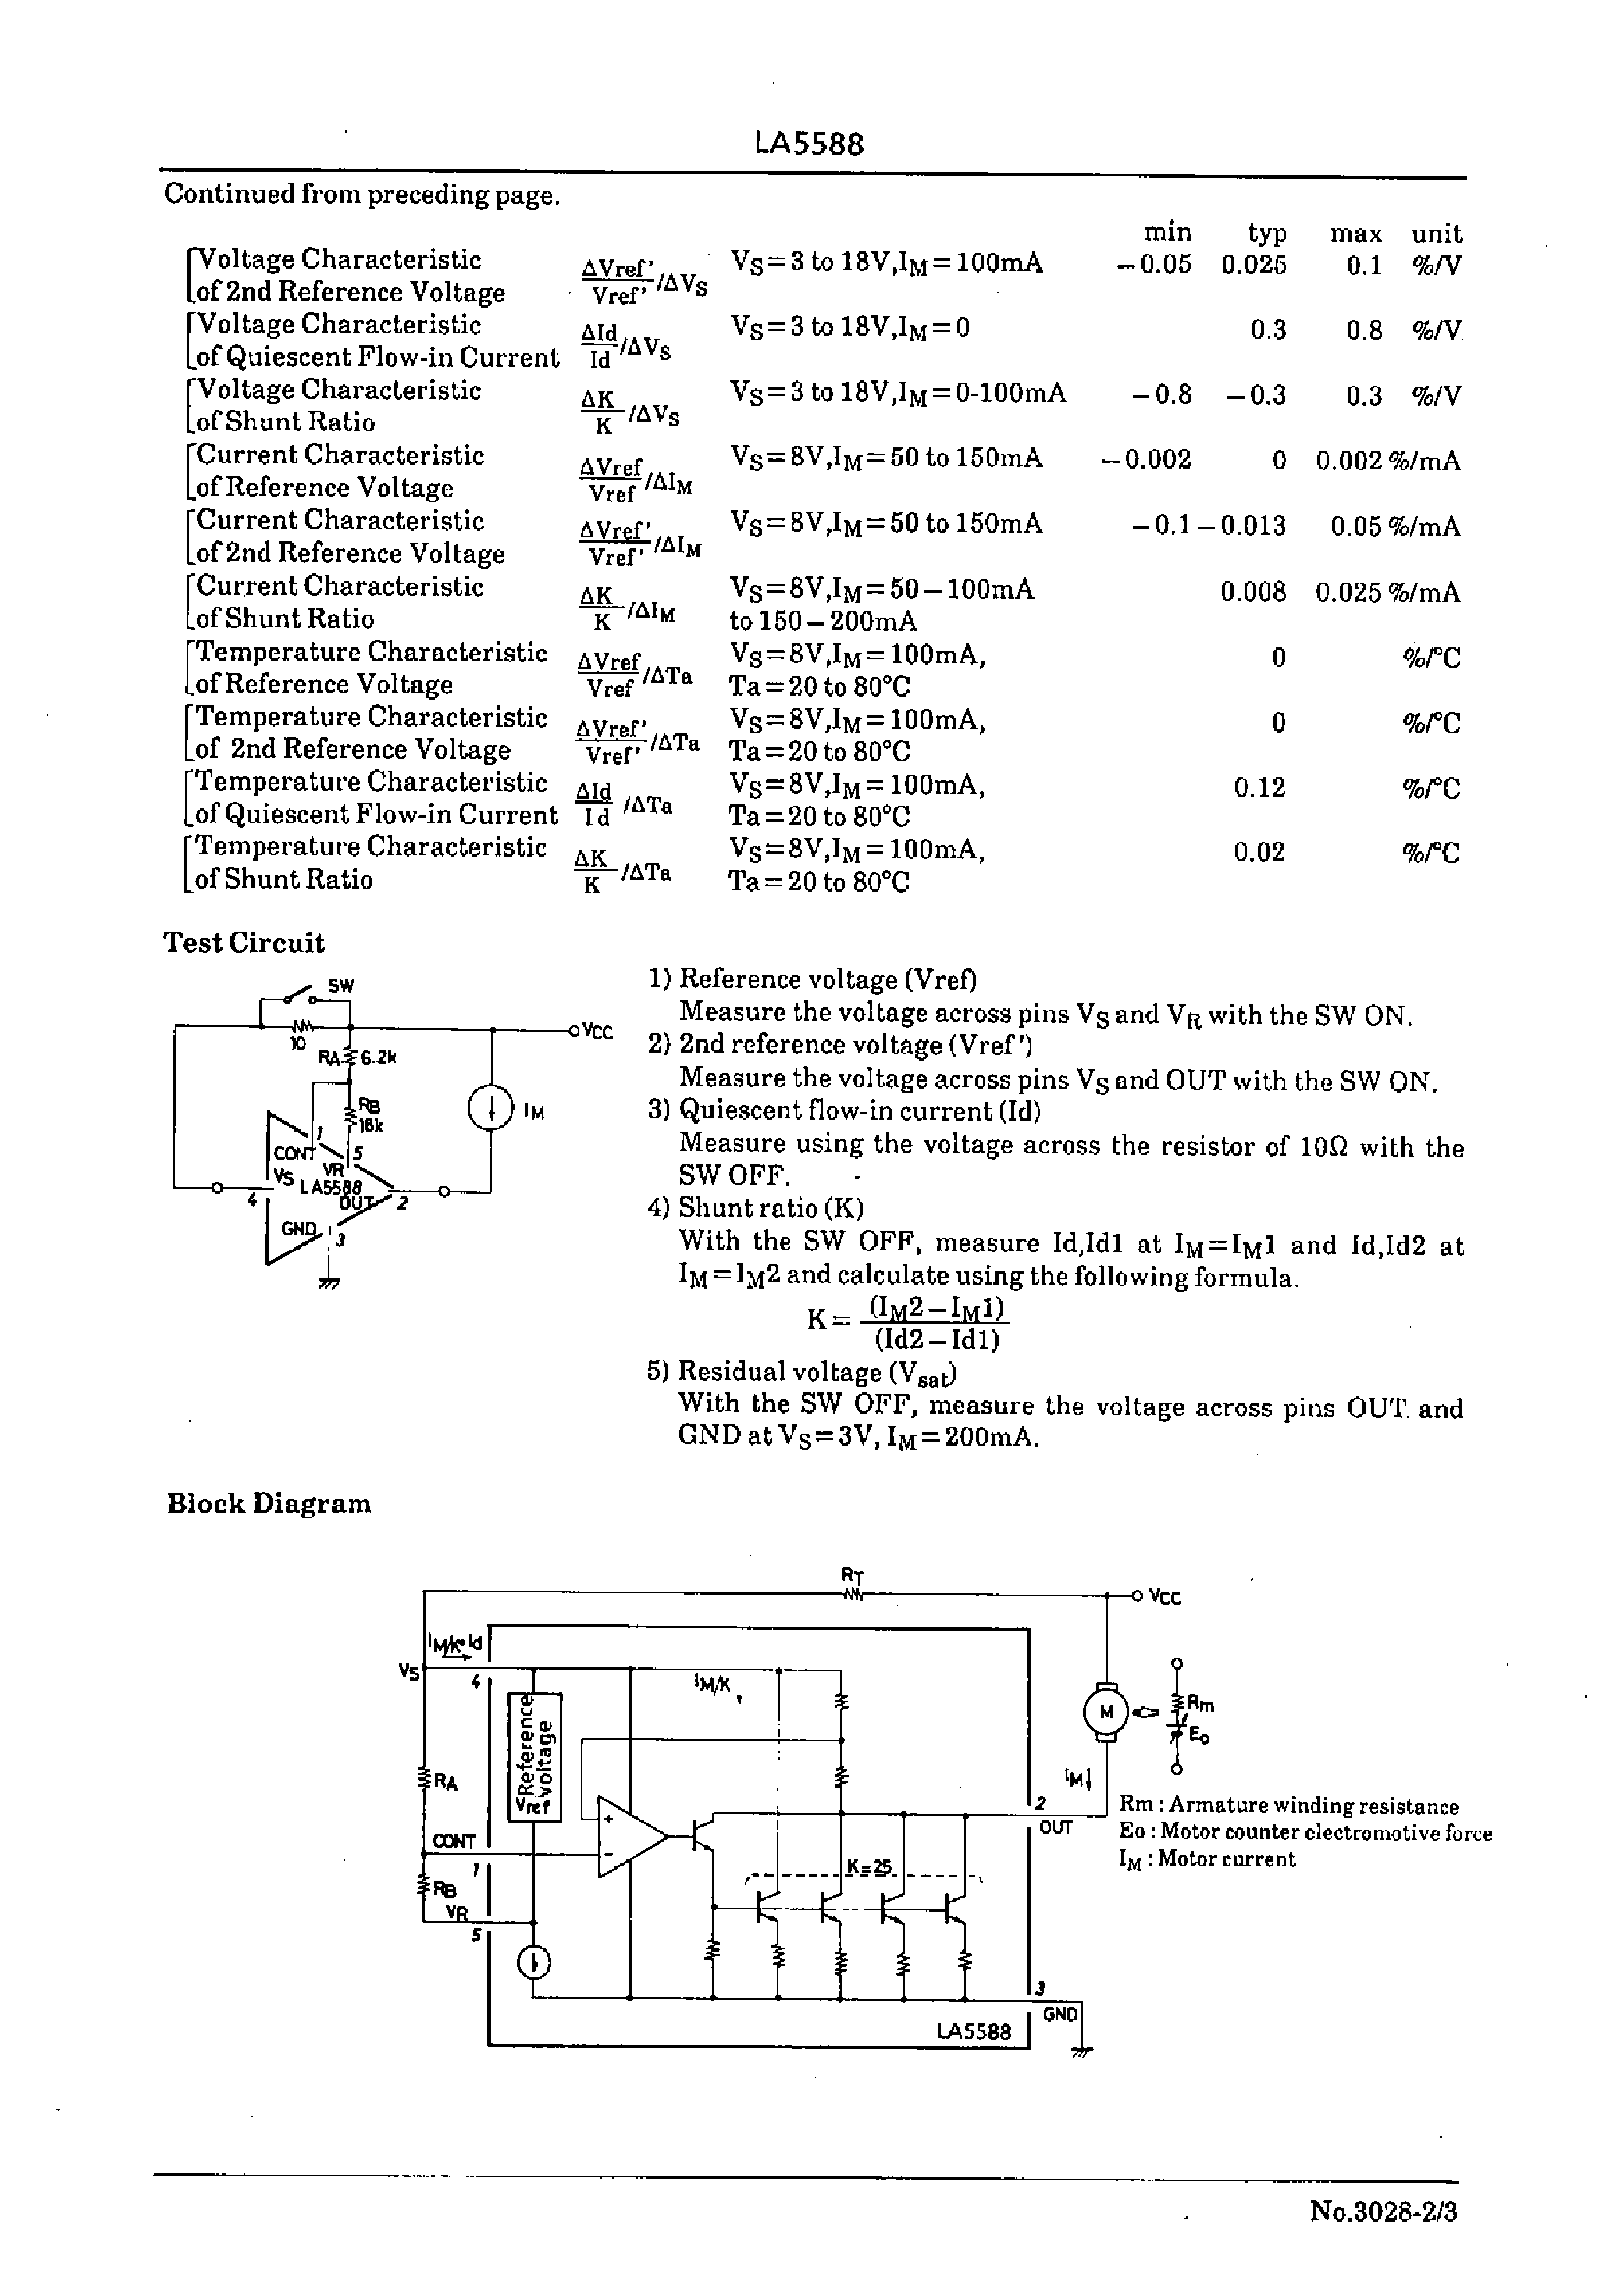 Datasheet LA5588 - General-Purpose Compact DC Moter Speed Controller page 2